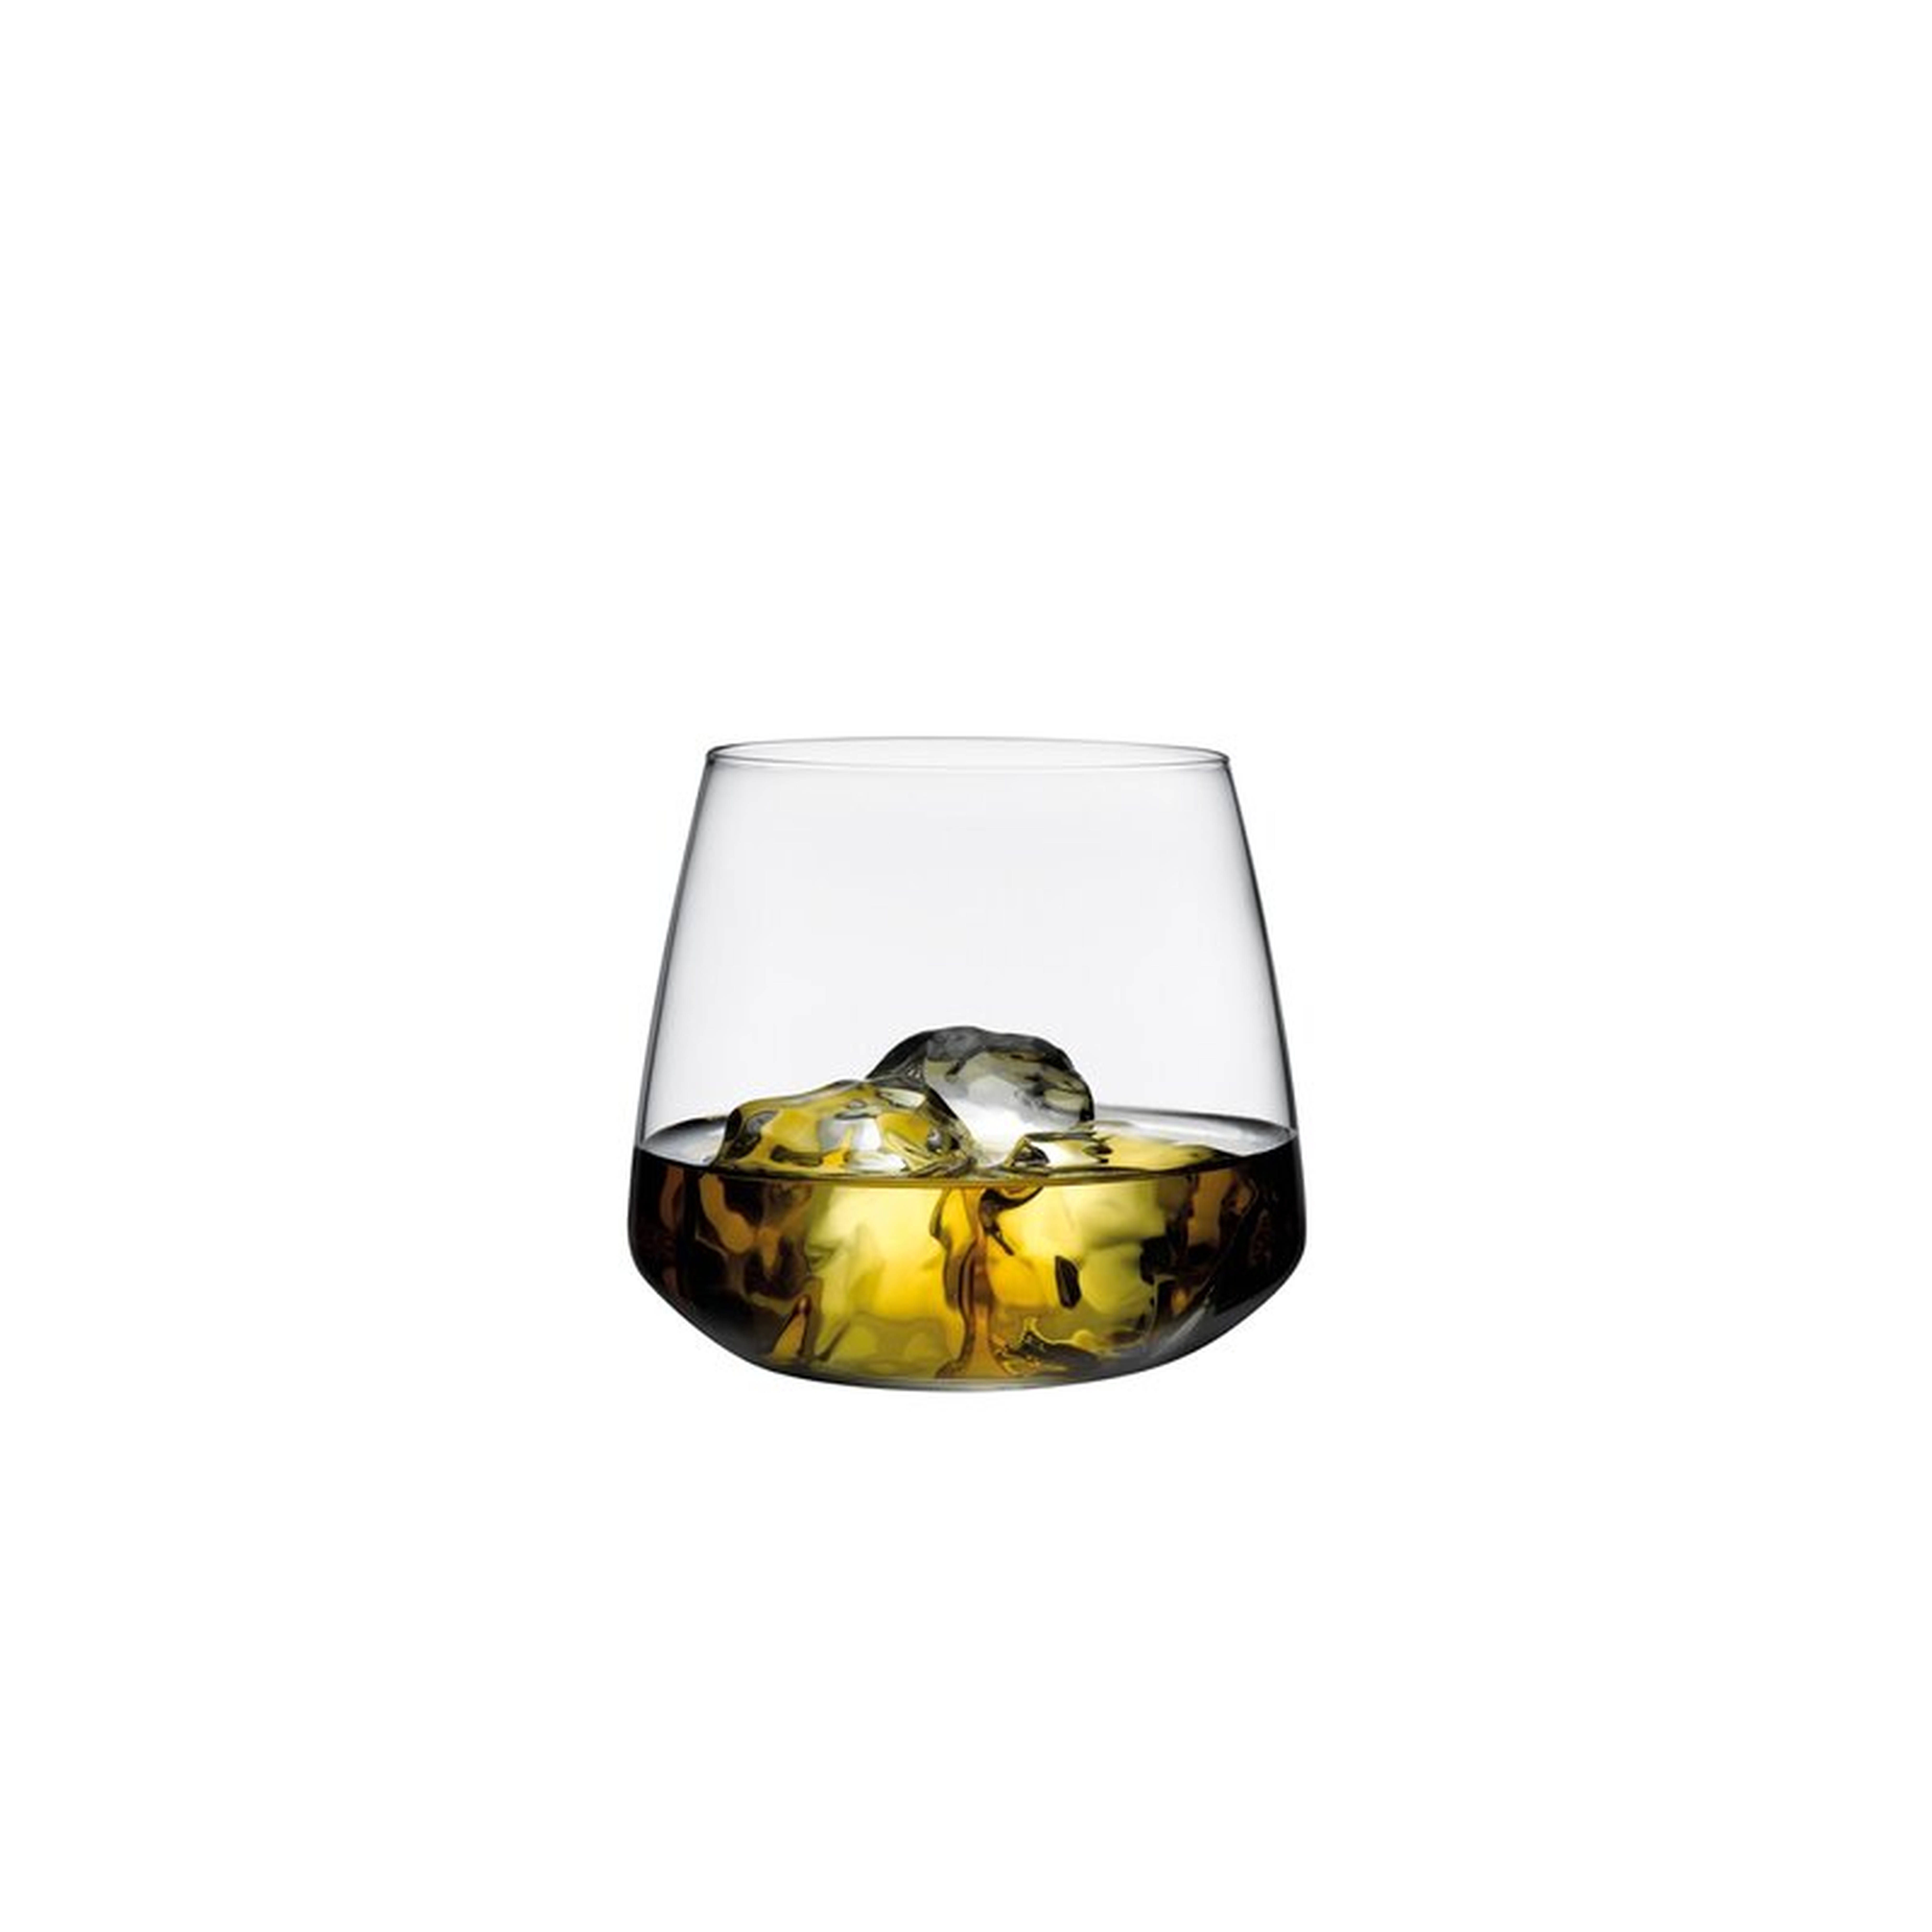 Nude Mirage Set of 4 Lead Free Crystal Whisky Glasses - Perigold